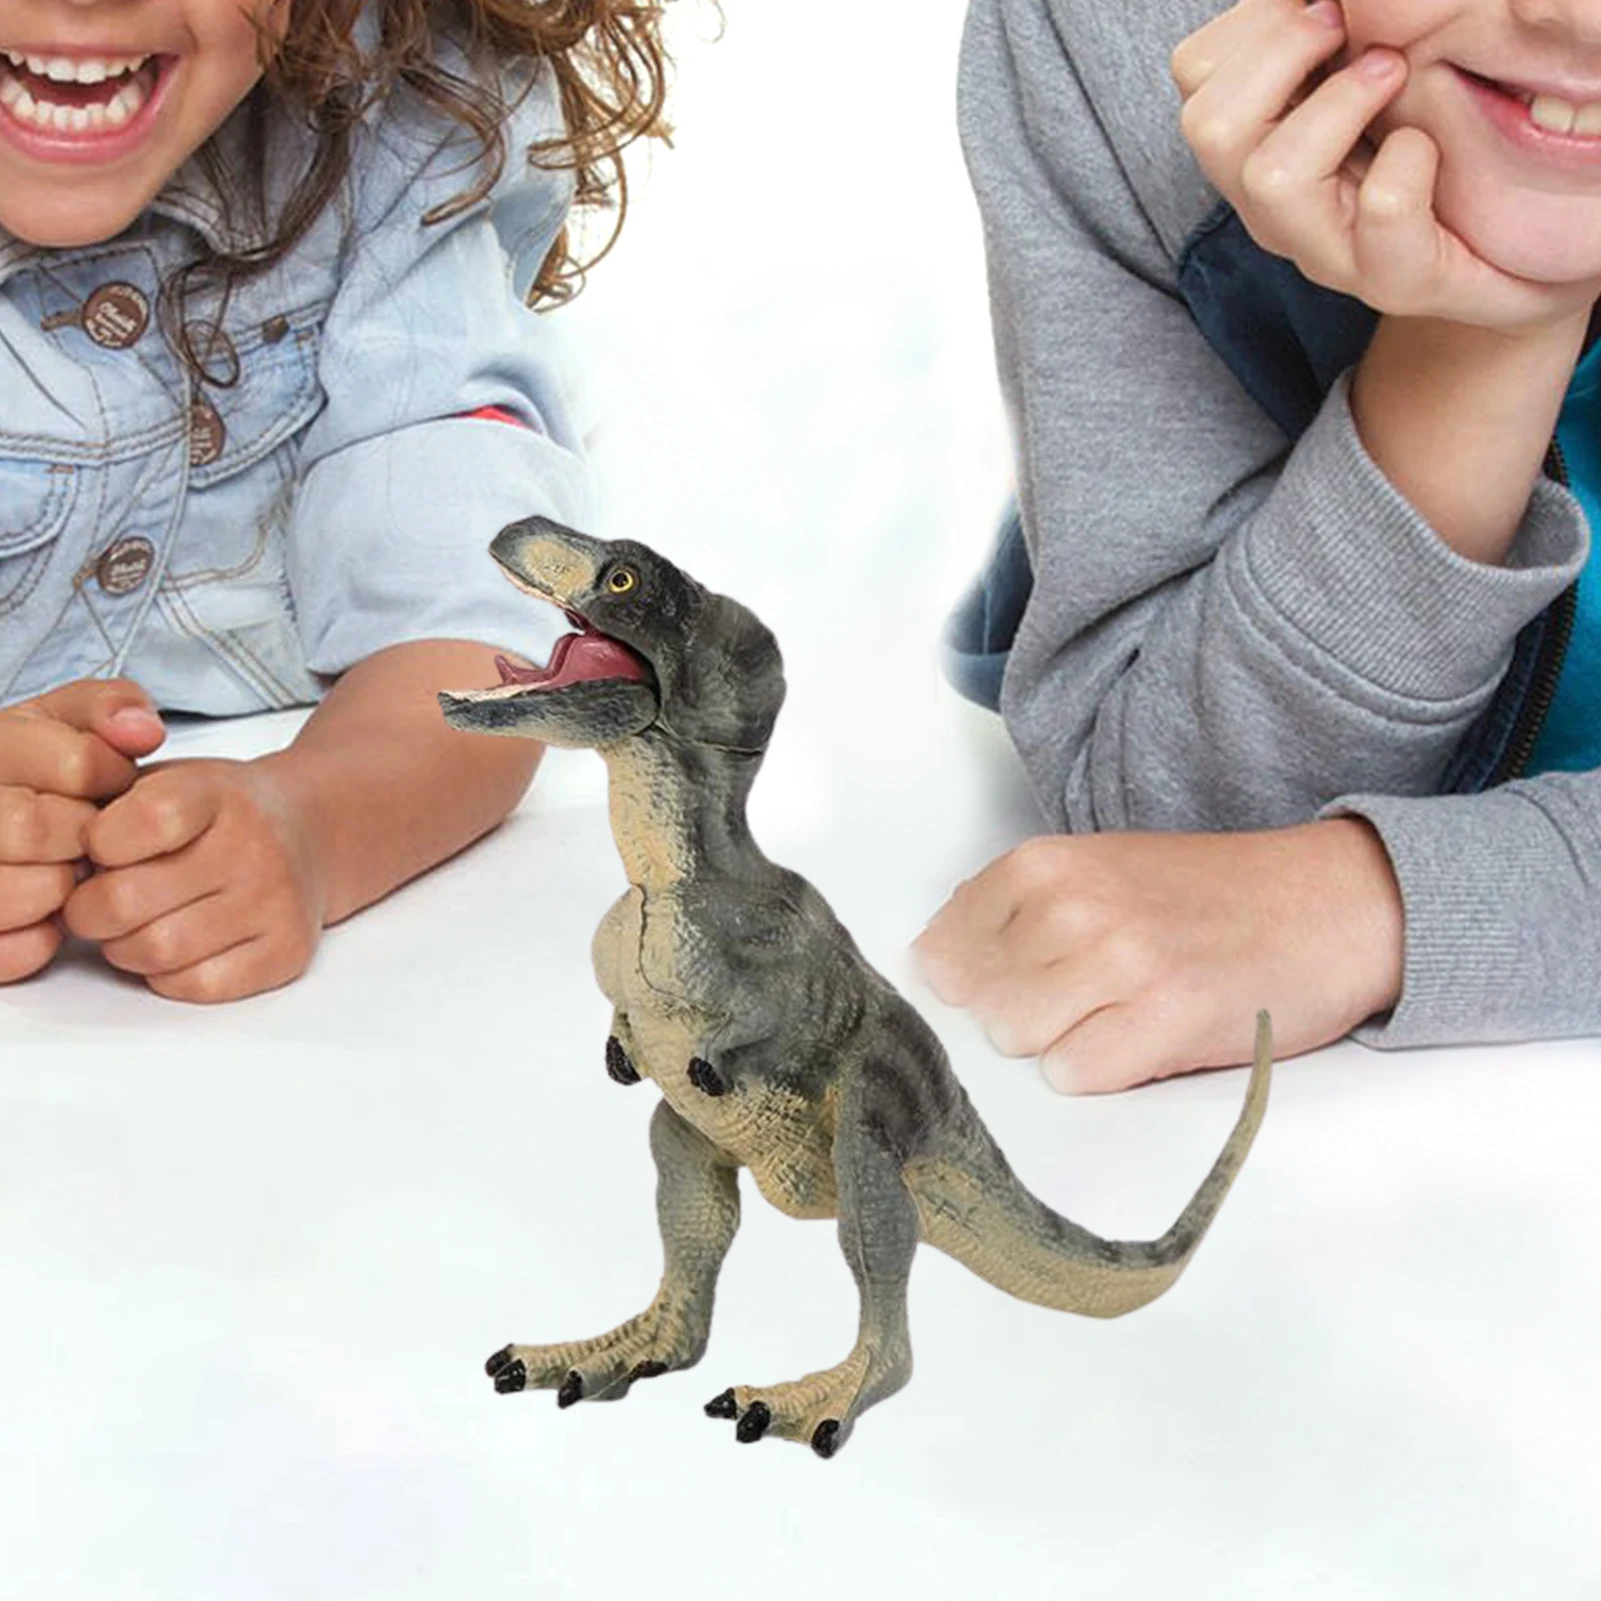 

Tyrannosaurus Rex Figure Simulation Realistic Dinosaur Toy PVC Wildlife Animal Model Figurines With Open And Closed Mouth For